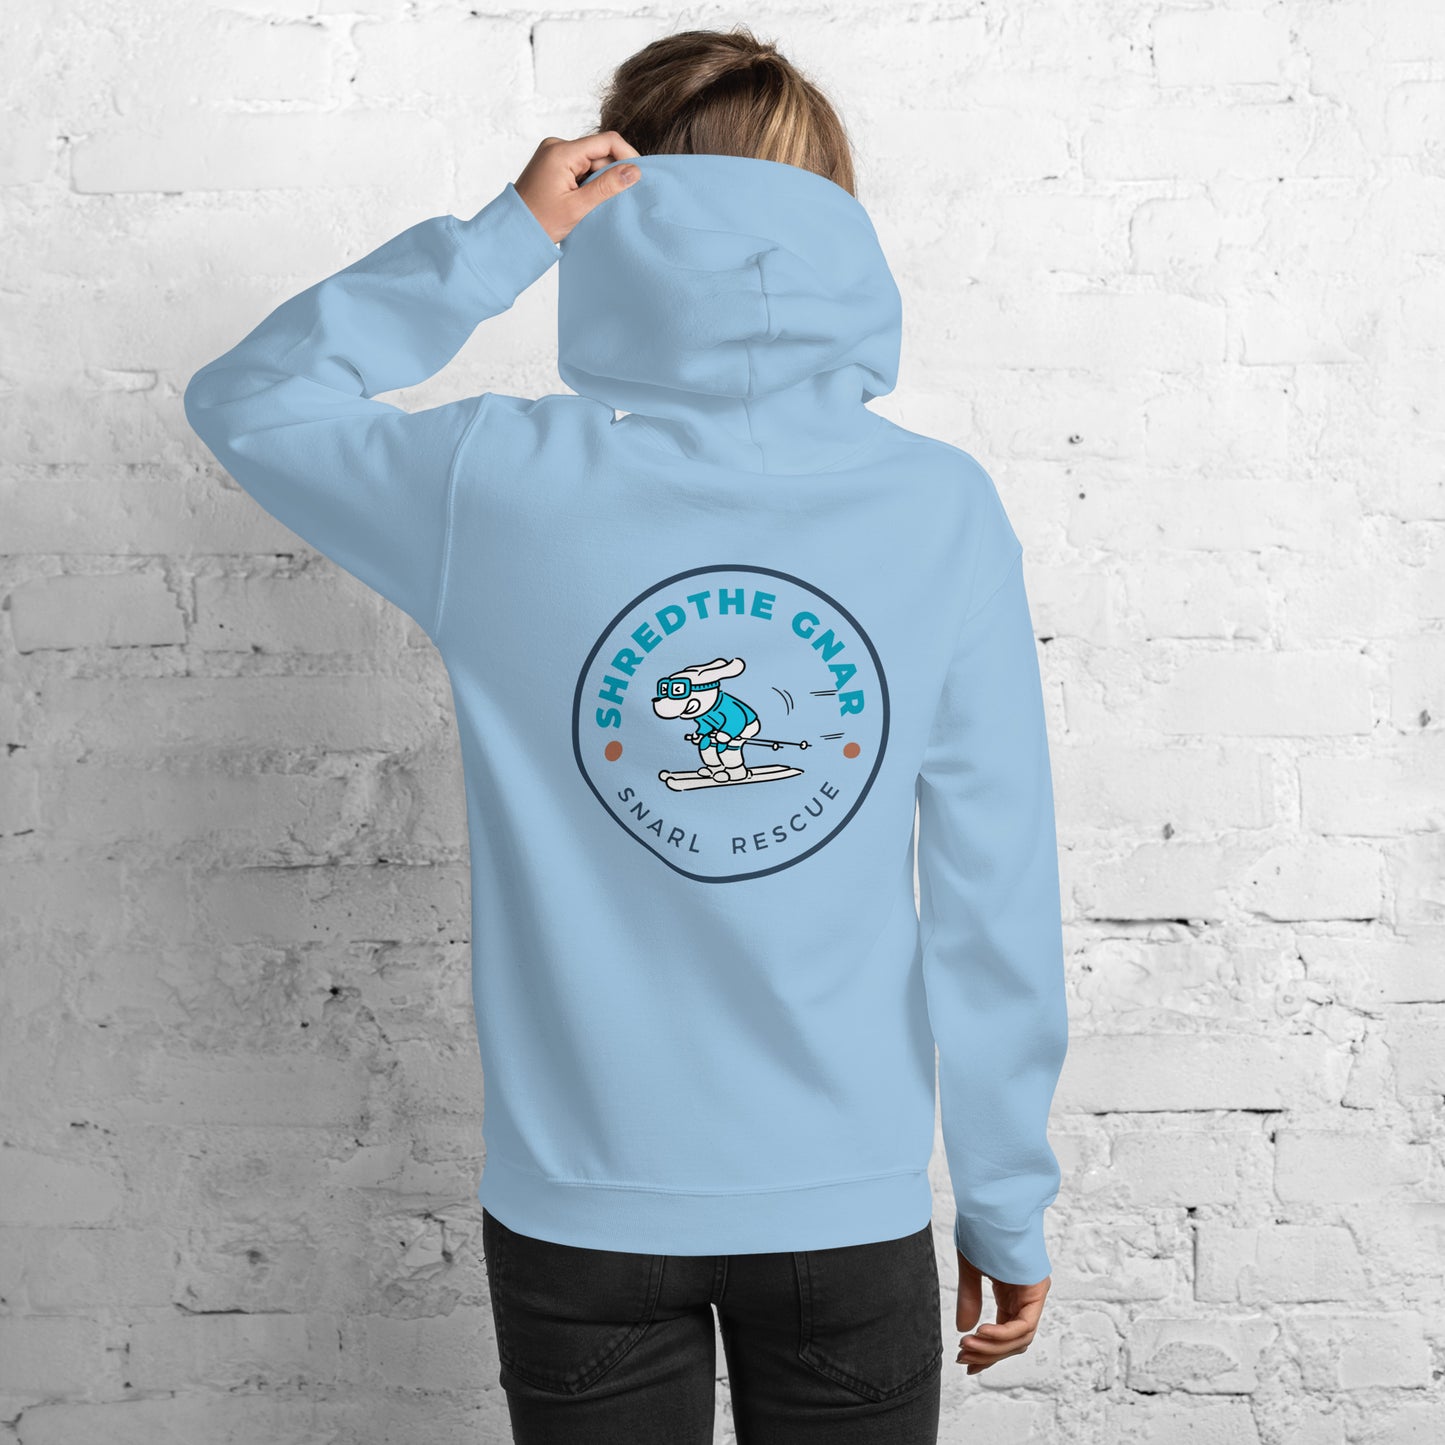 The "Shred the Gnar" Hoodie